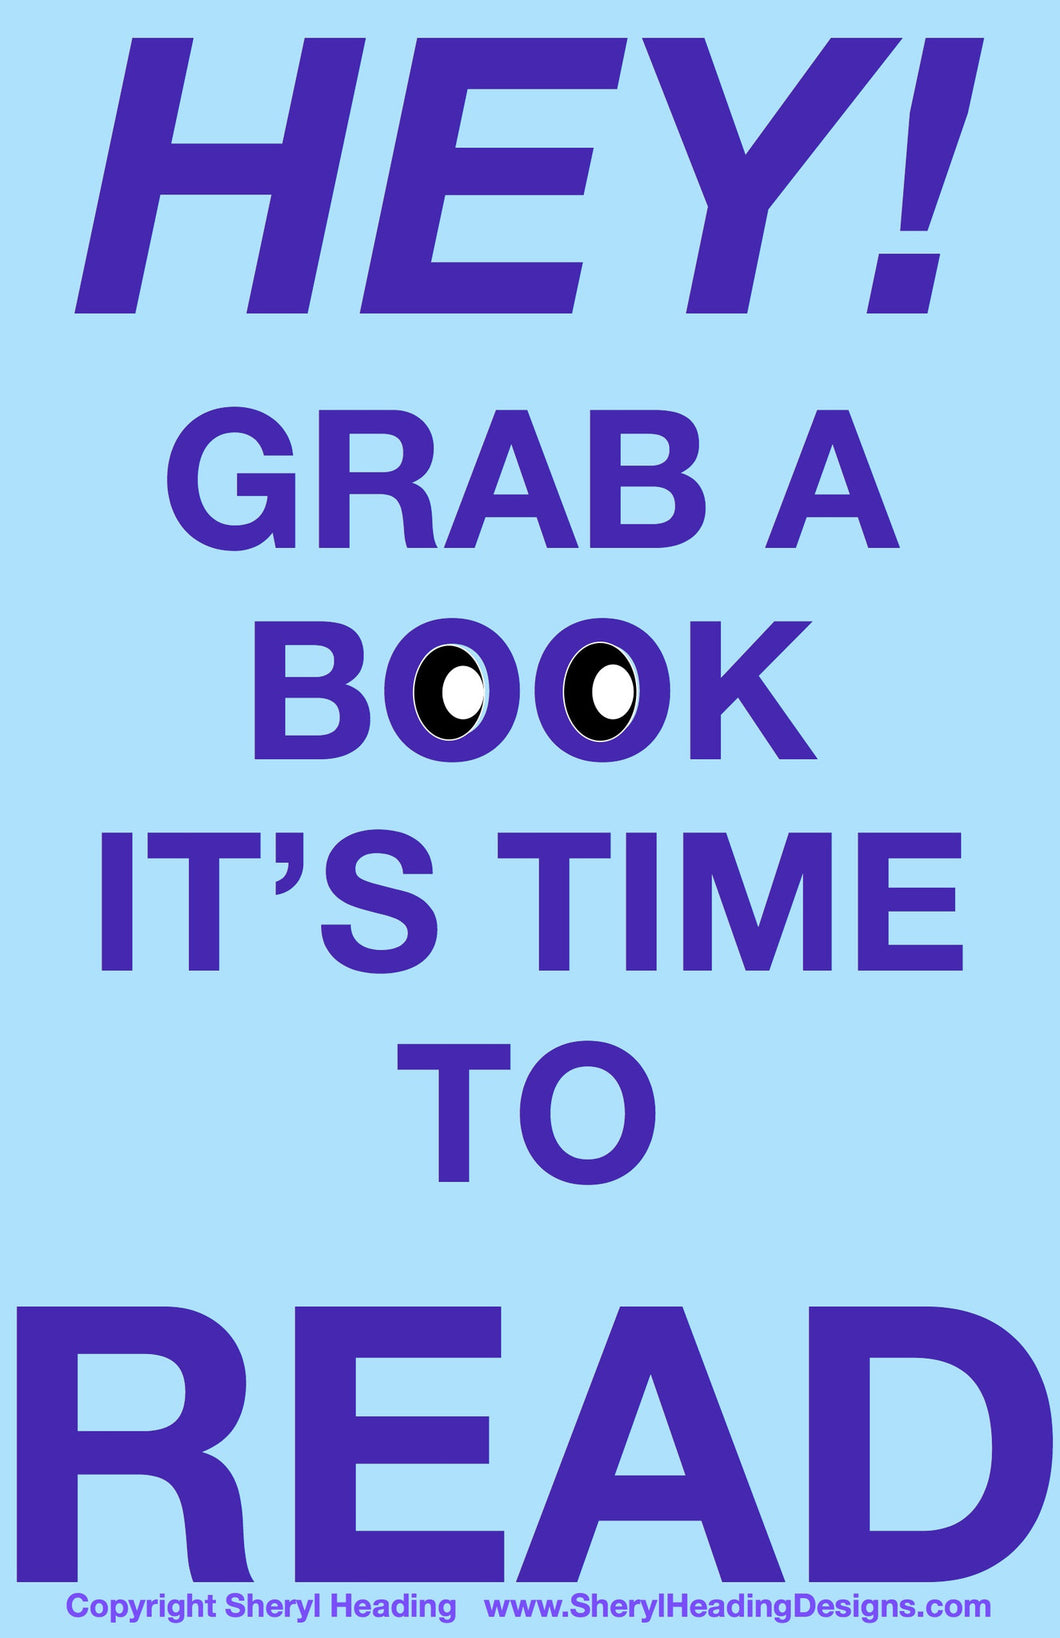 Hey! Grab a Book It's Time to READ Poster - Sheryl Heading Designs